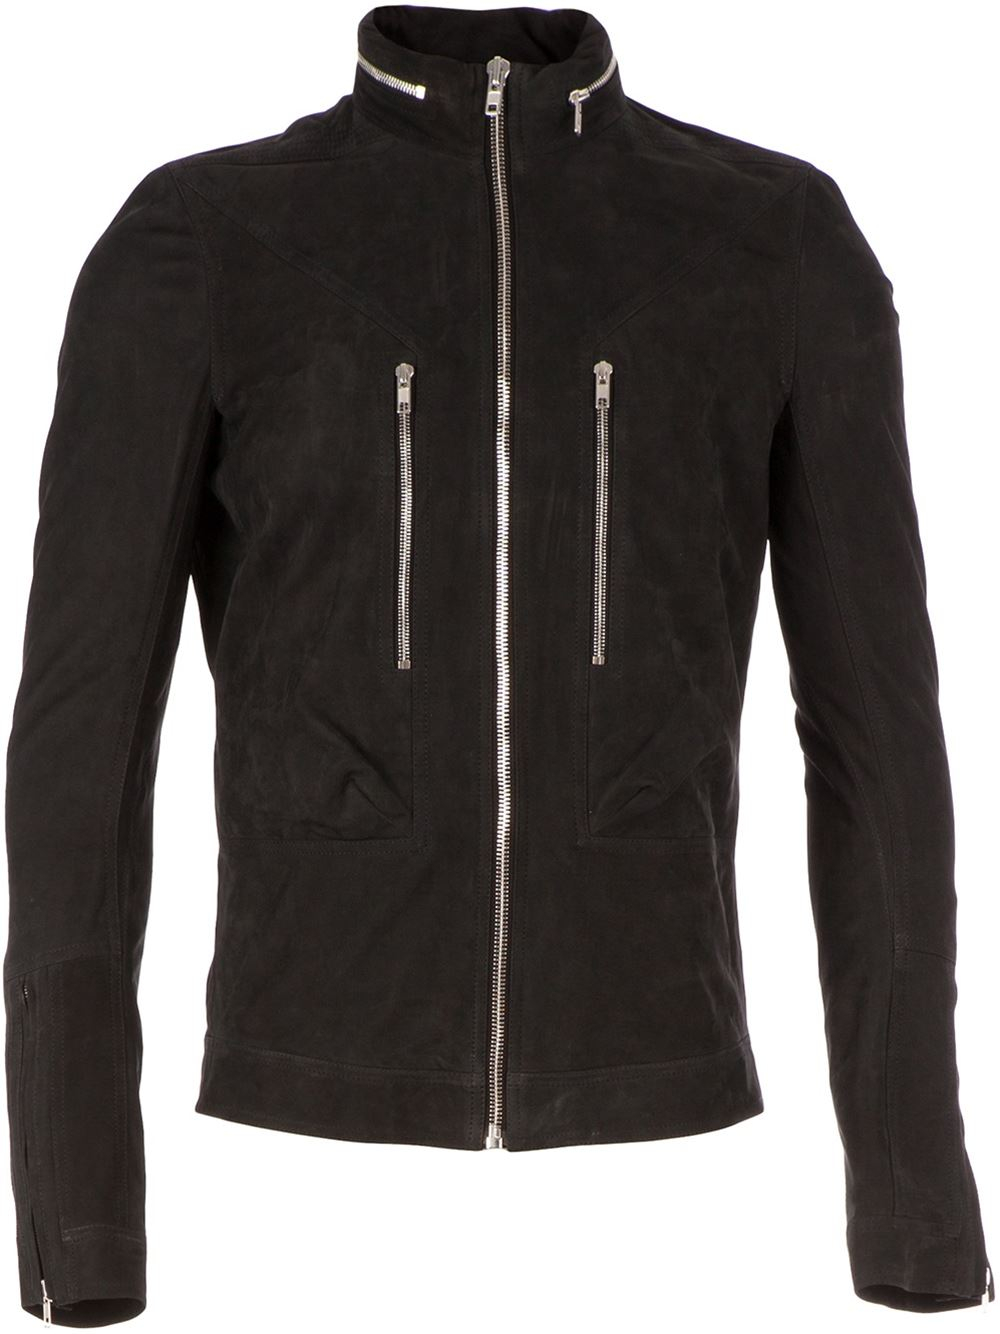 Rick Owens Zipped Leather Jacket in Black for Men | Lyst